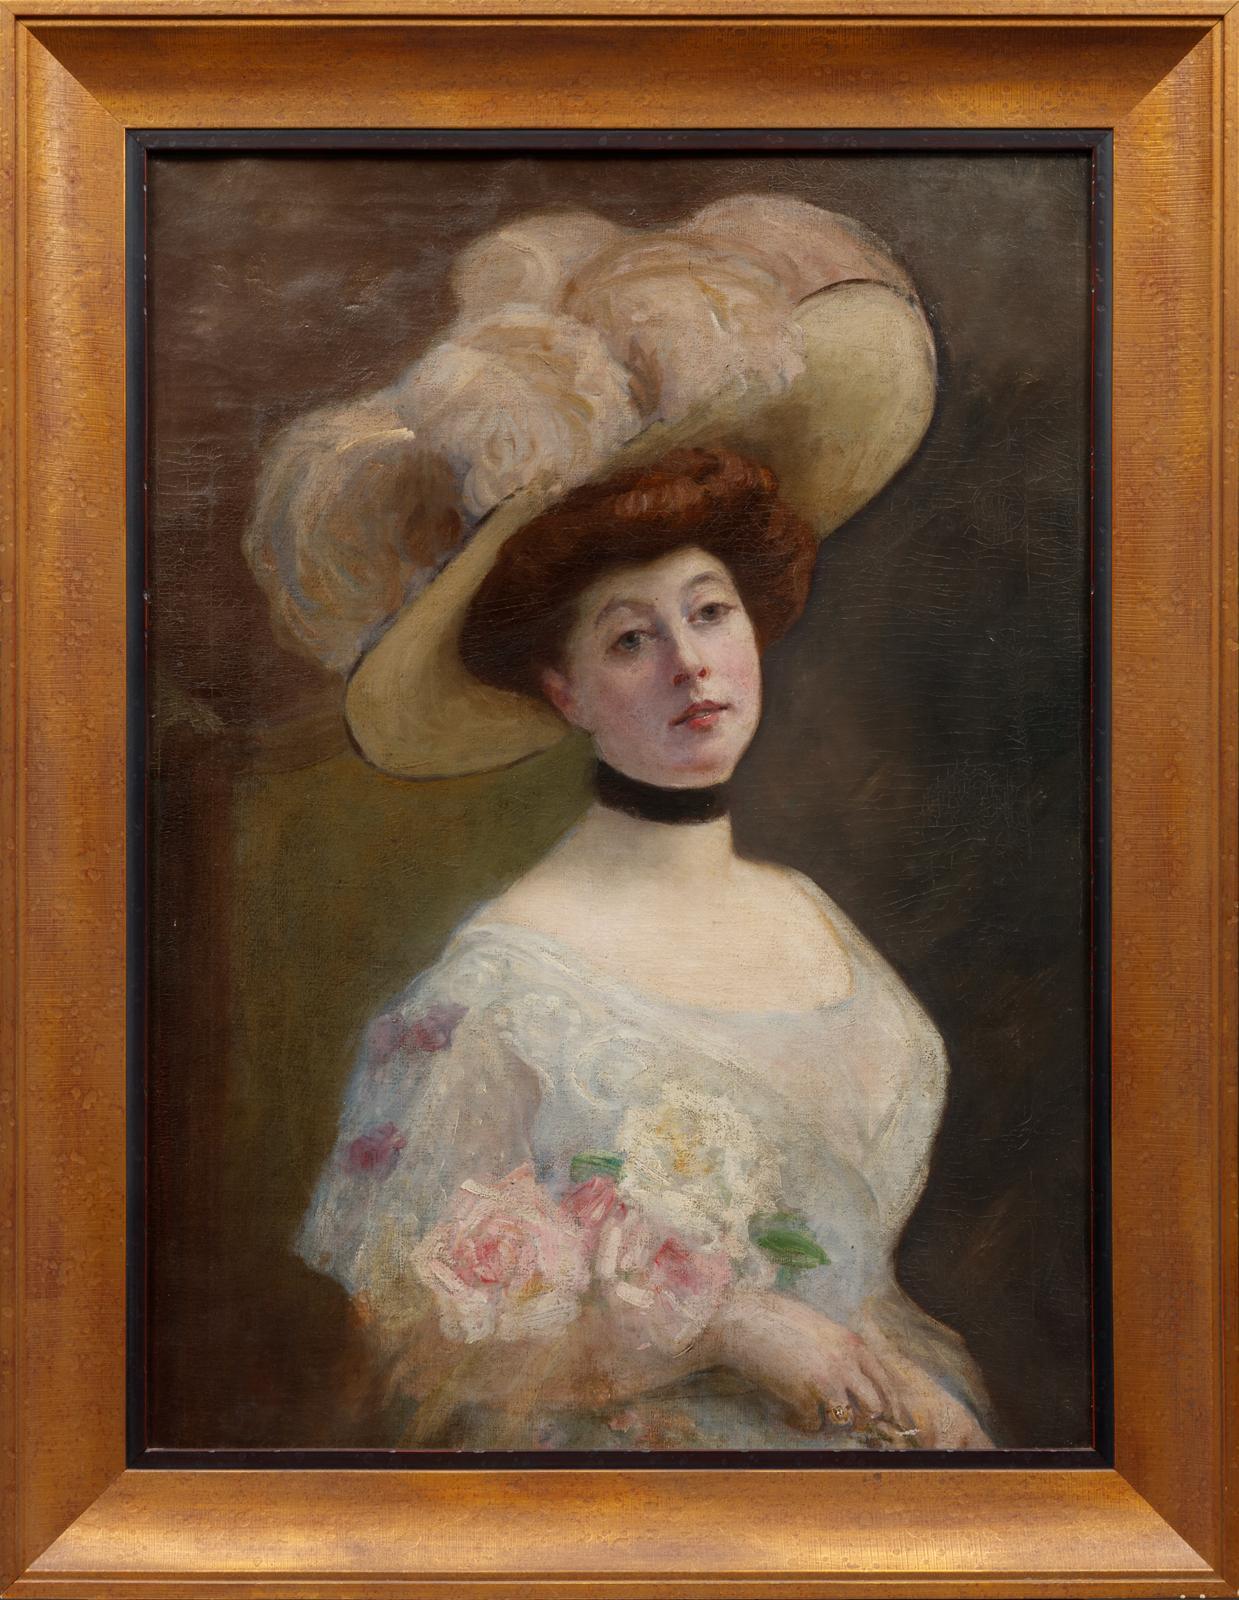 Unknown Portrait Painting - "Portrait of a Lady" - 19th-Century French Framed Antique Woman Oil Painting